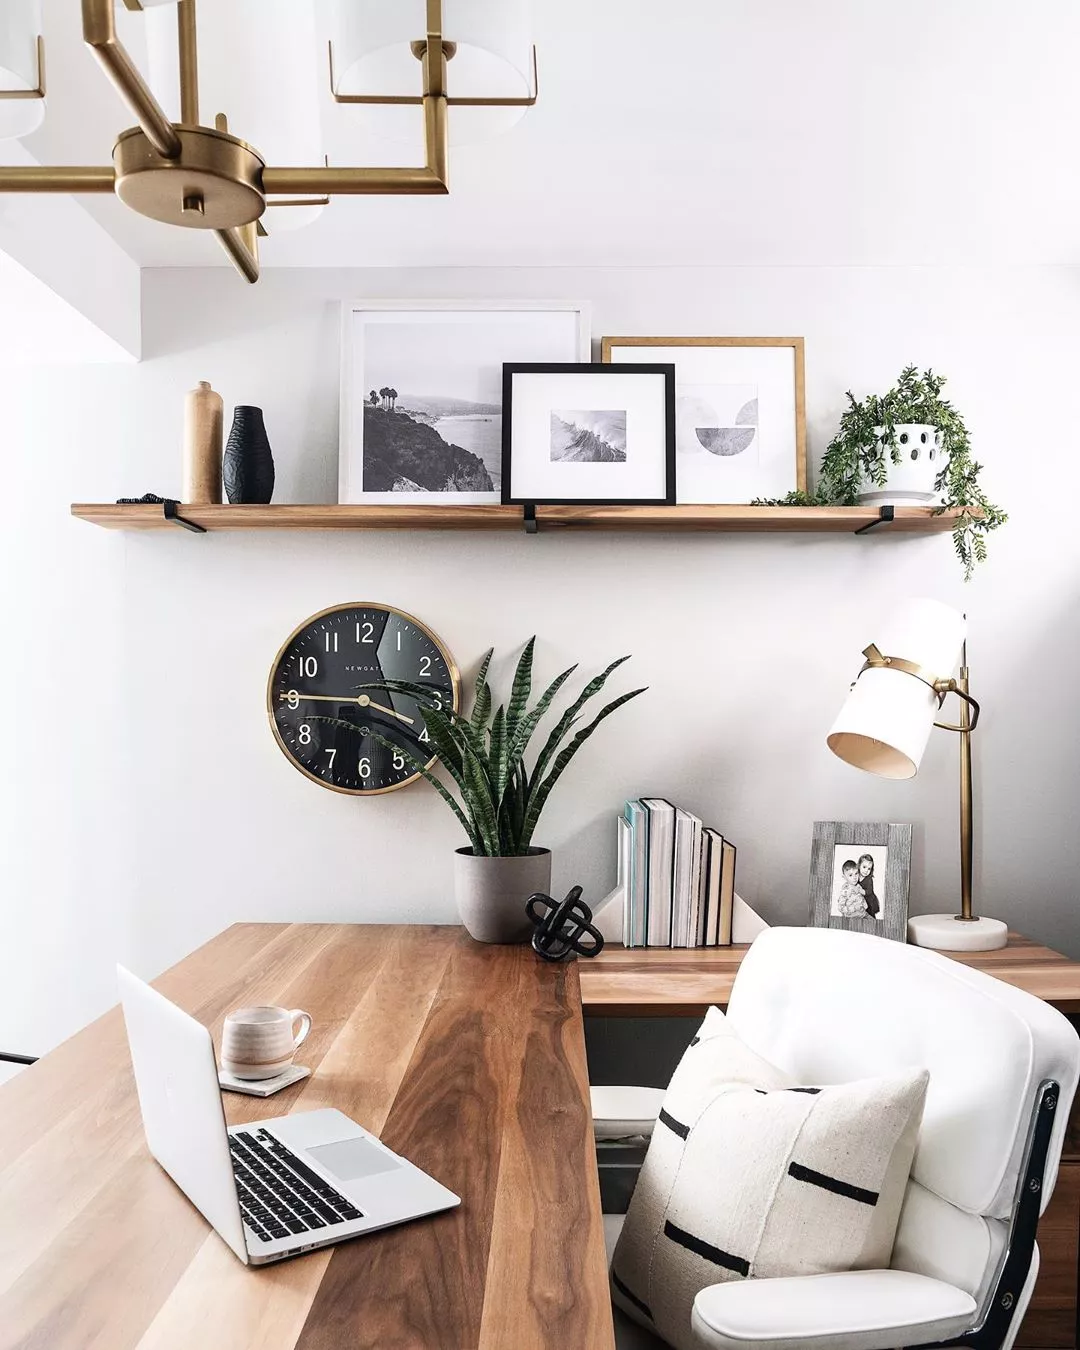 Work From Home on Your Couch: How to Create a Living Room Home Office